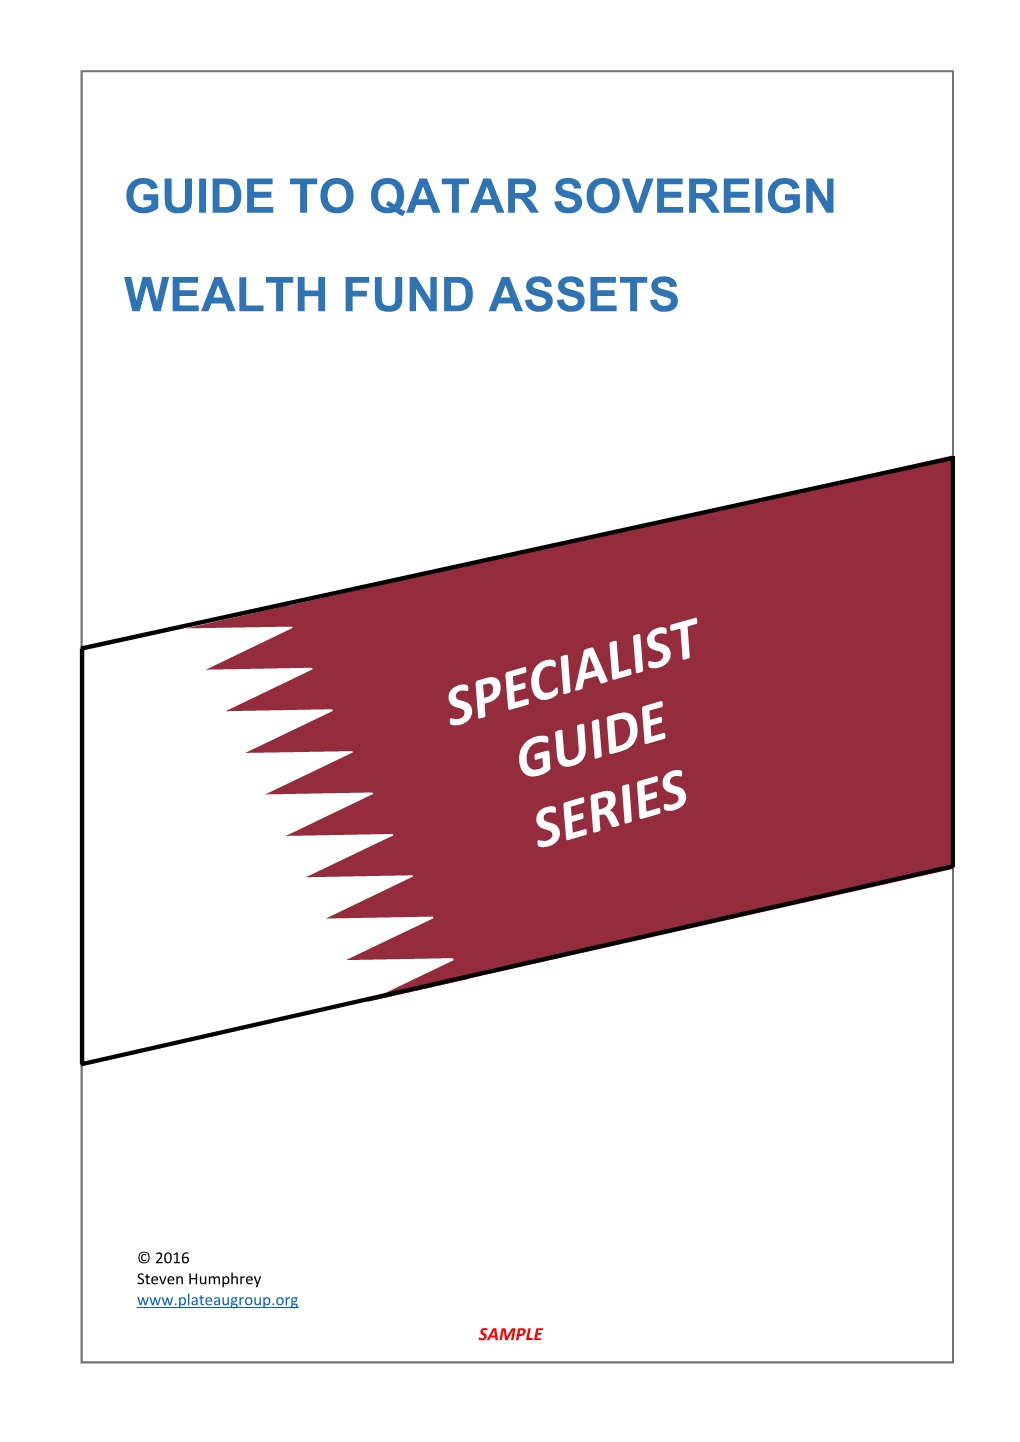 Guide to Qatar Sovereign Wealth Fund Assets